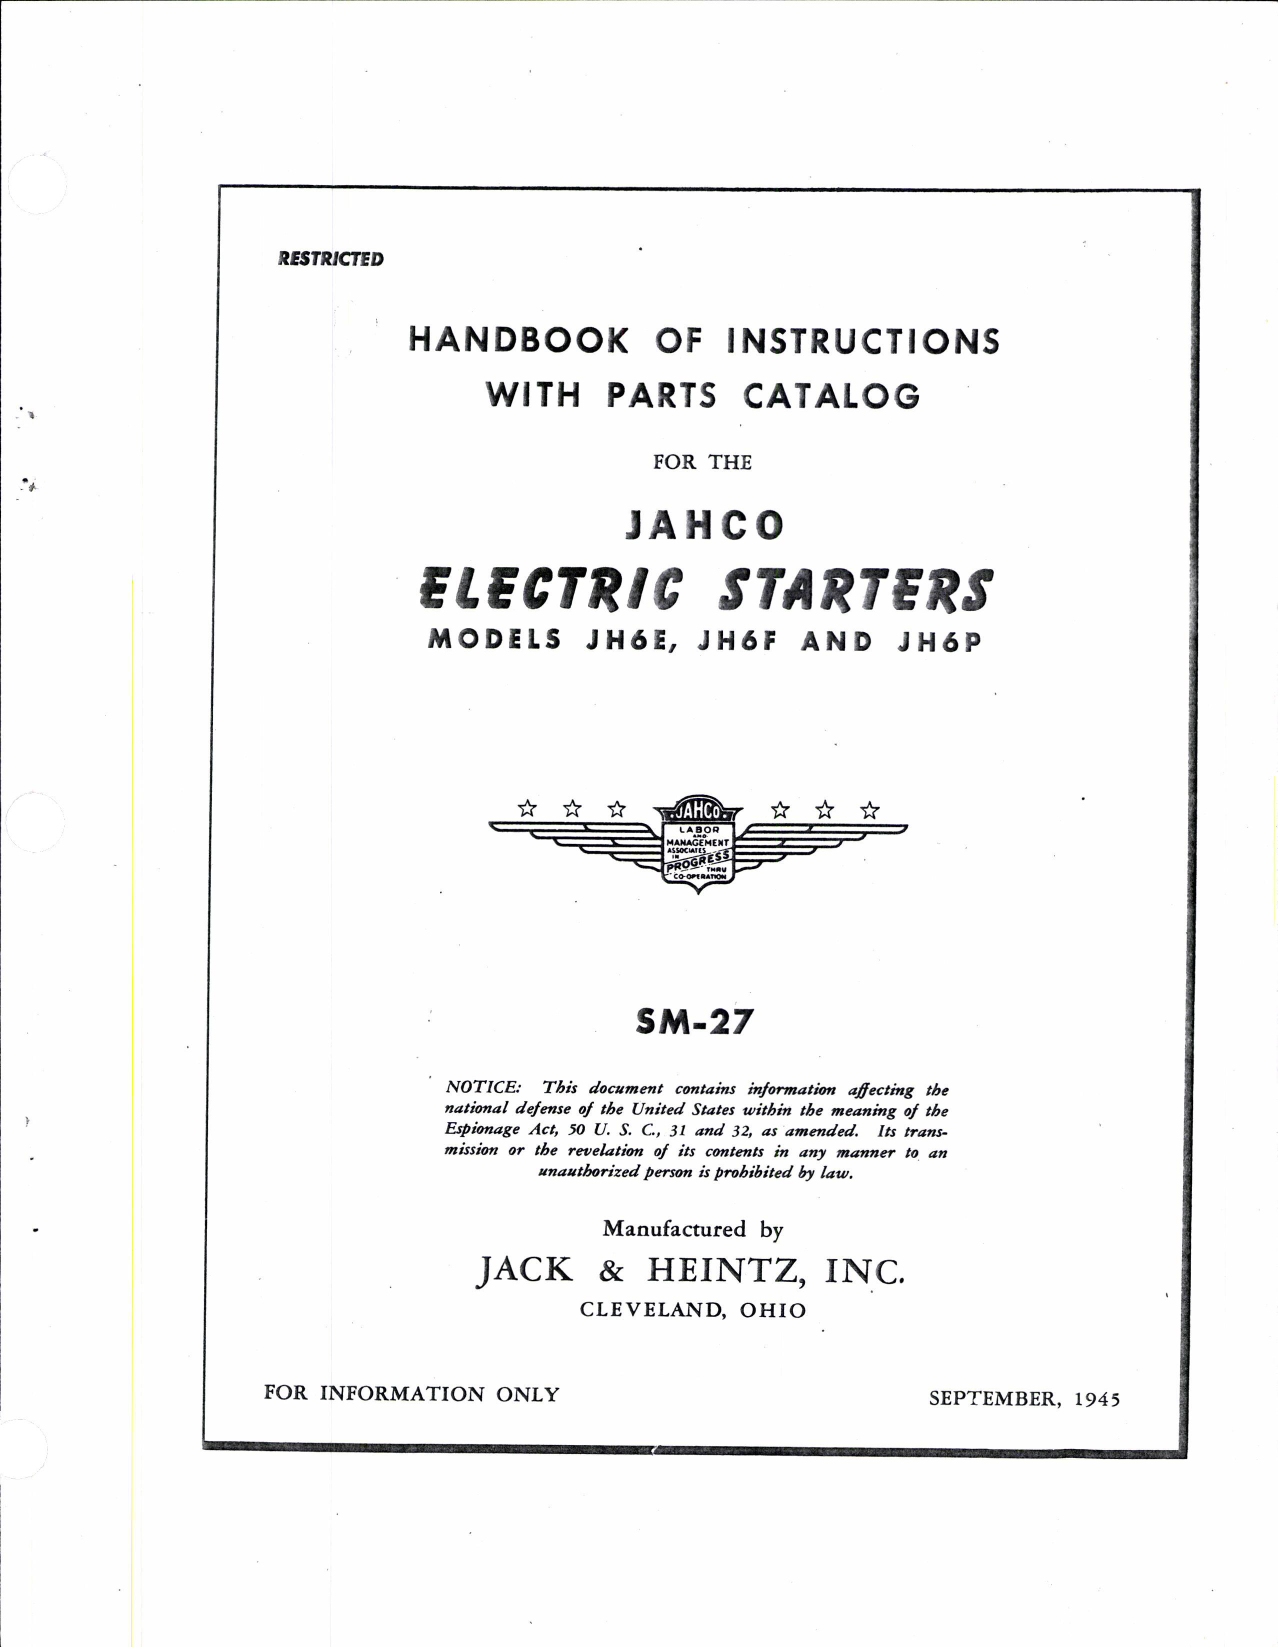 Sample page 3 from AirCorps Library document: Handbook of Instructions with Parts Catalog for Jahco Electric Starters Models JH6E, JH6F, and JH6P